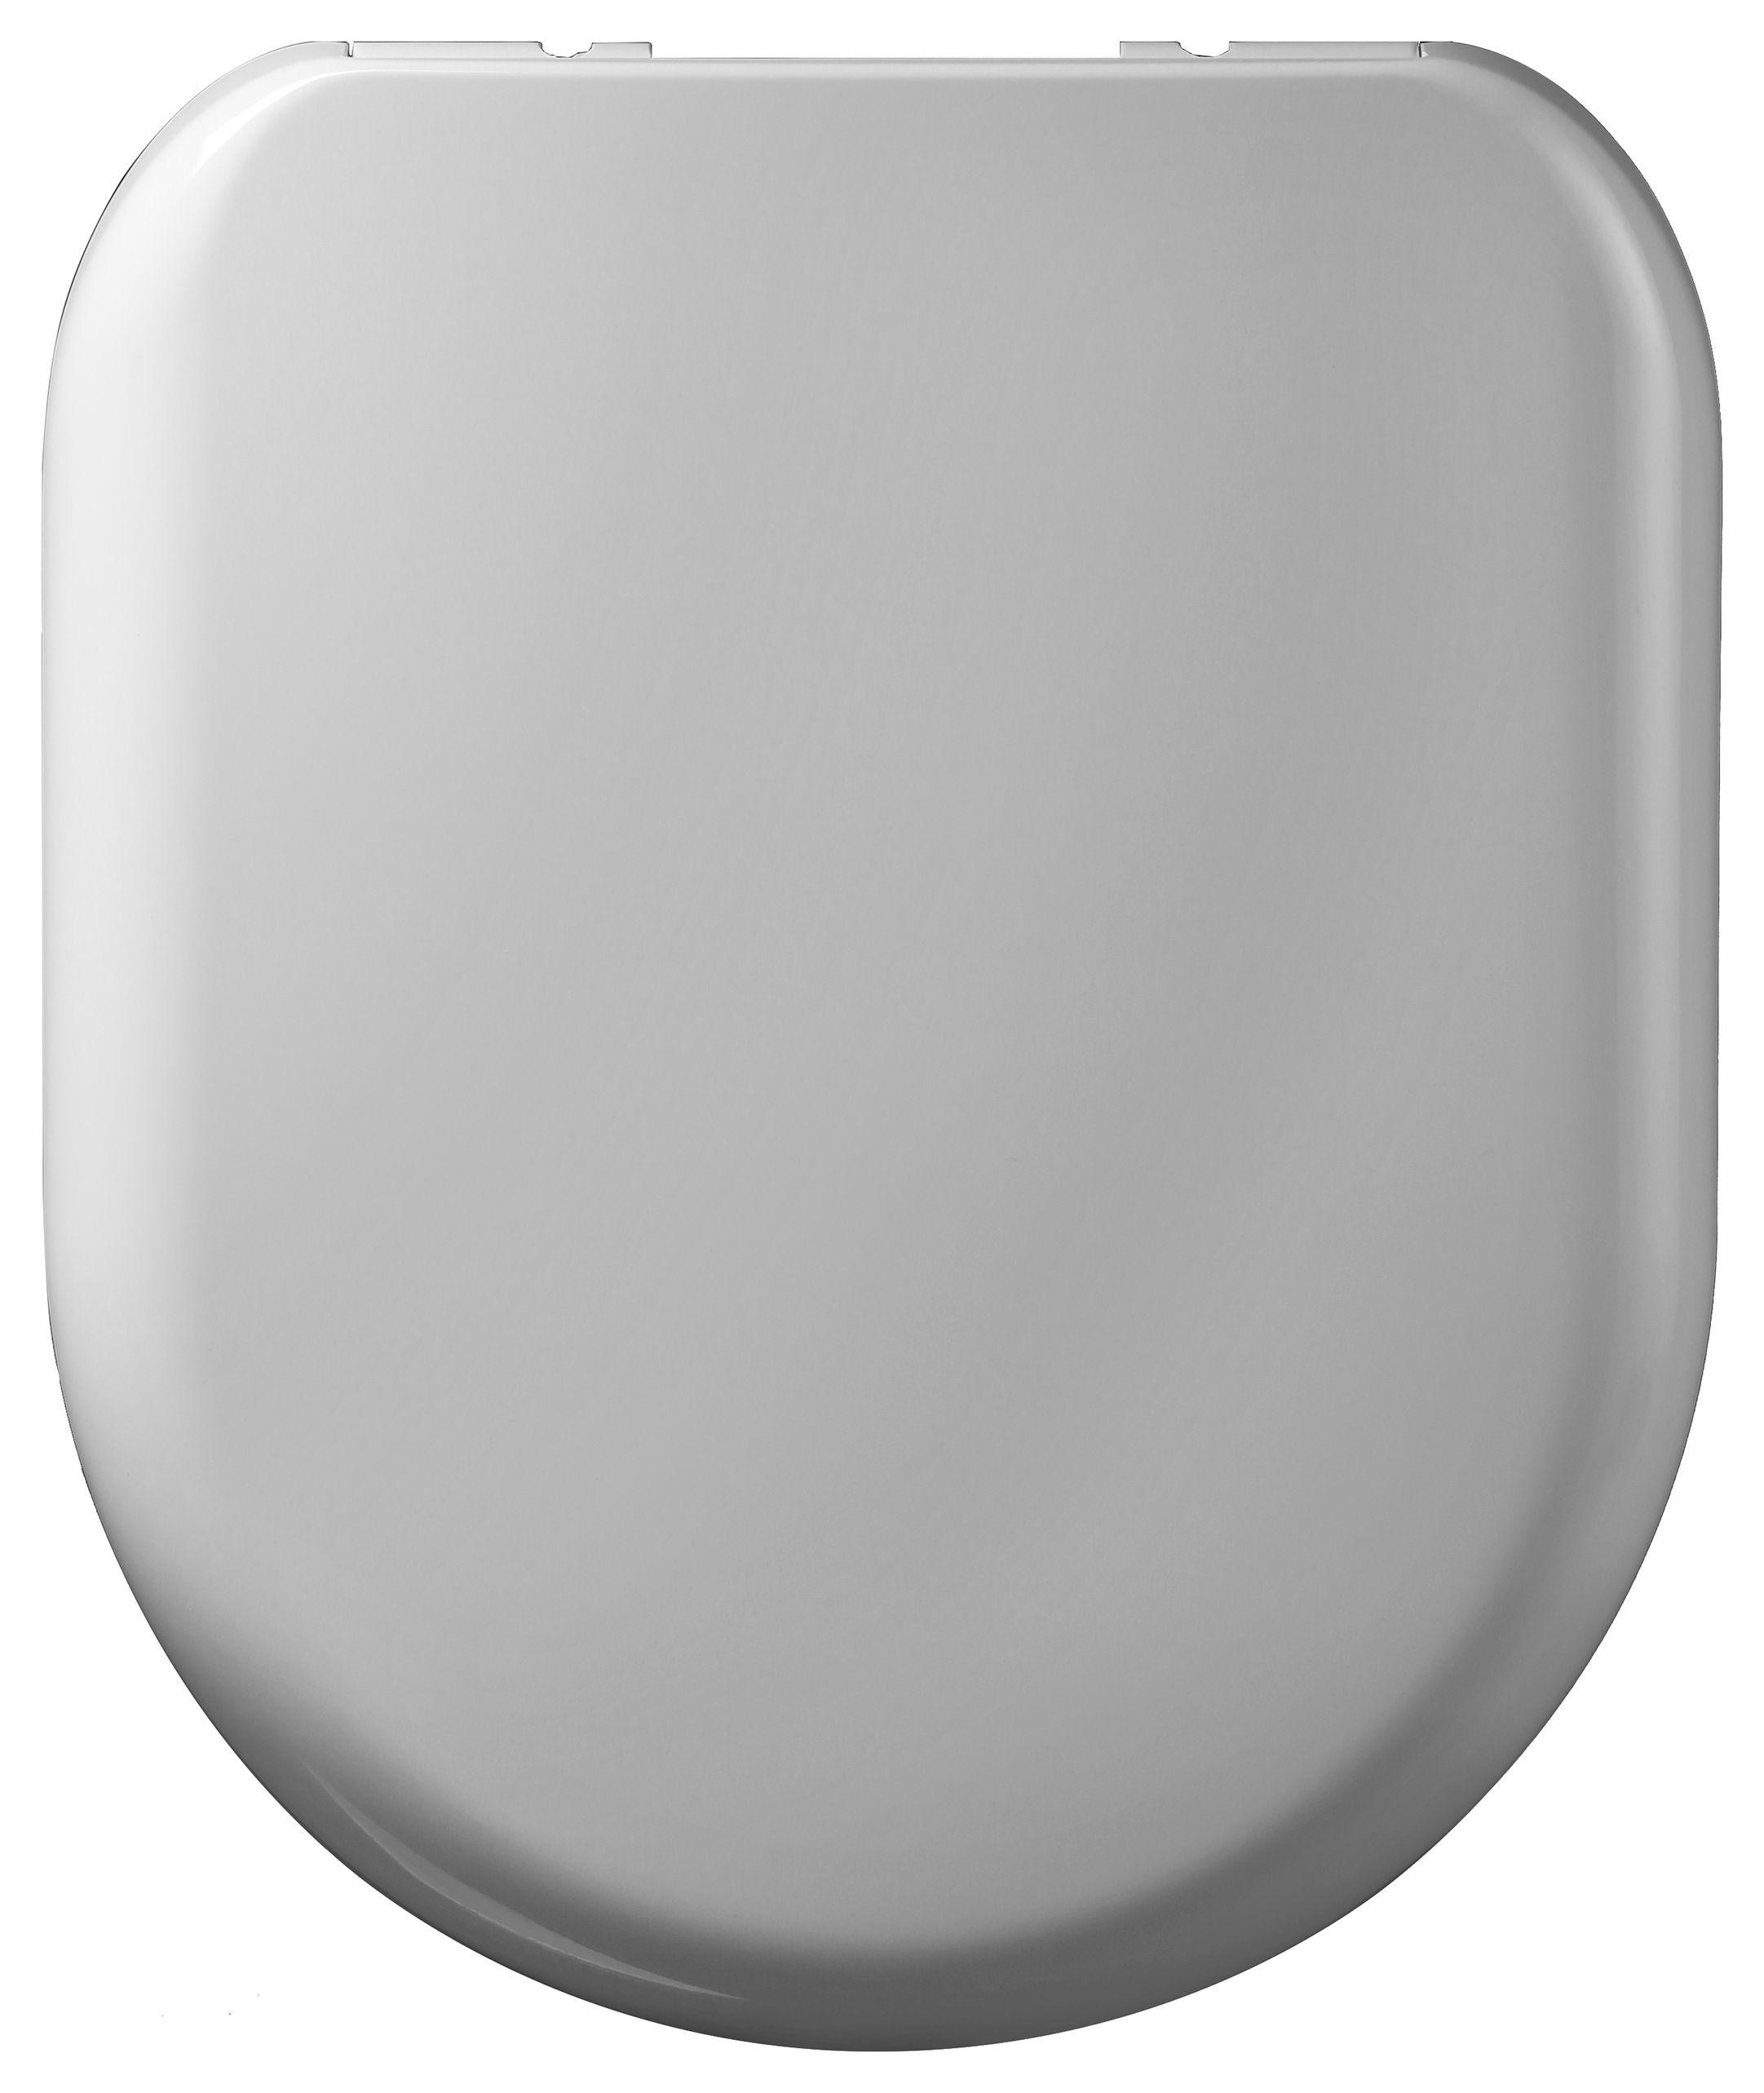 Image of Wickes D Shaped Thermoset Plastic Soft Close Toilet Seat - White